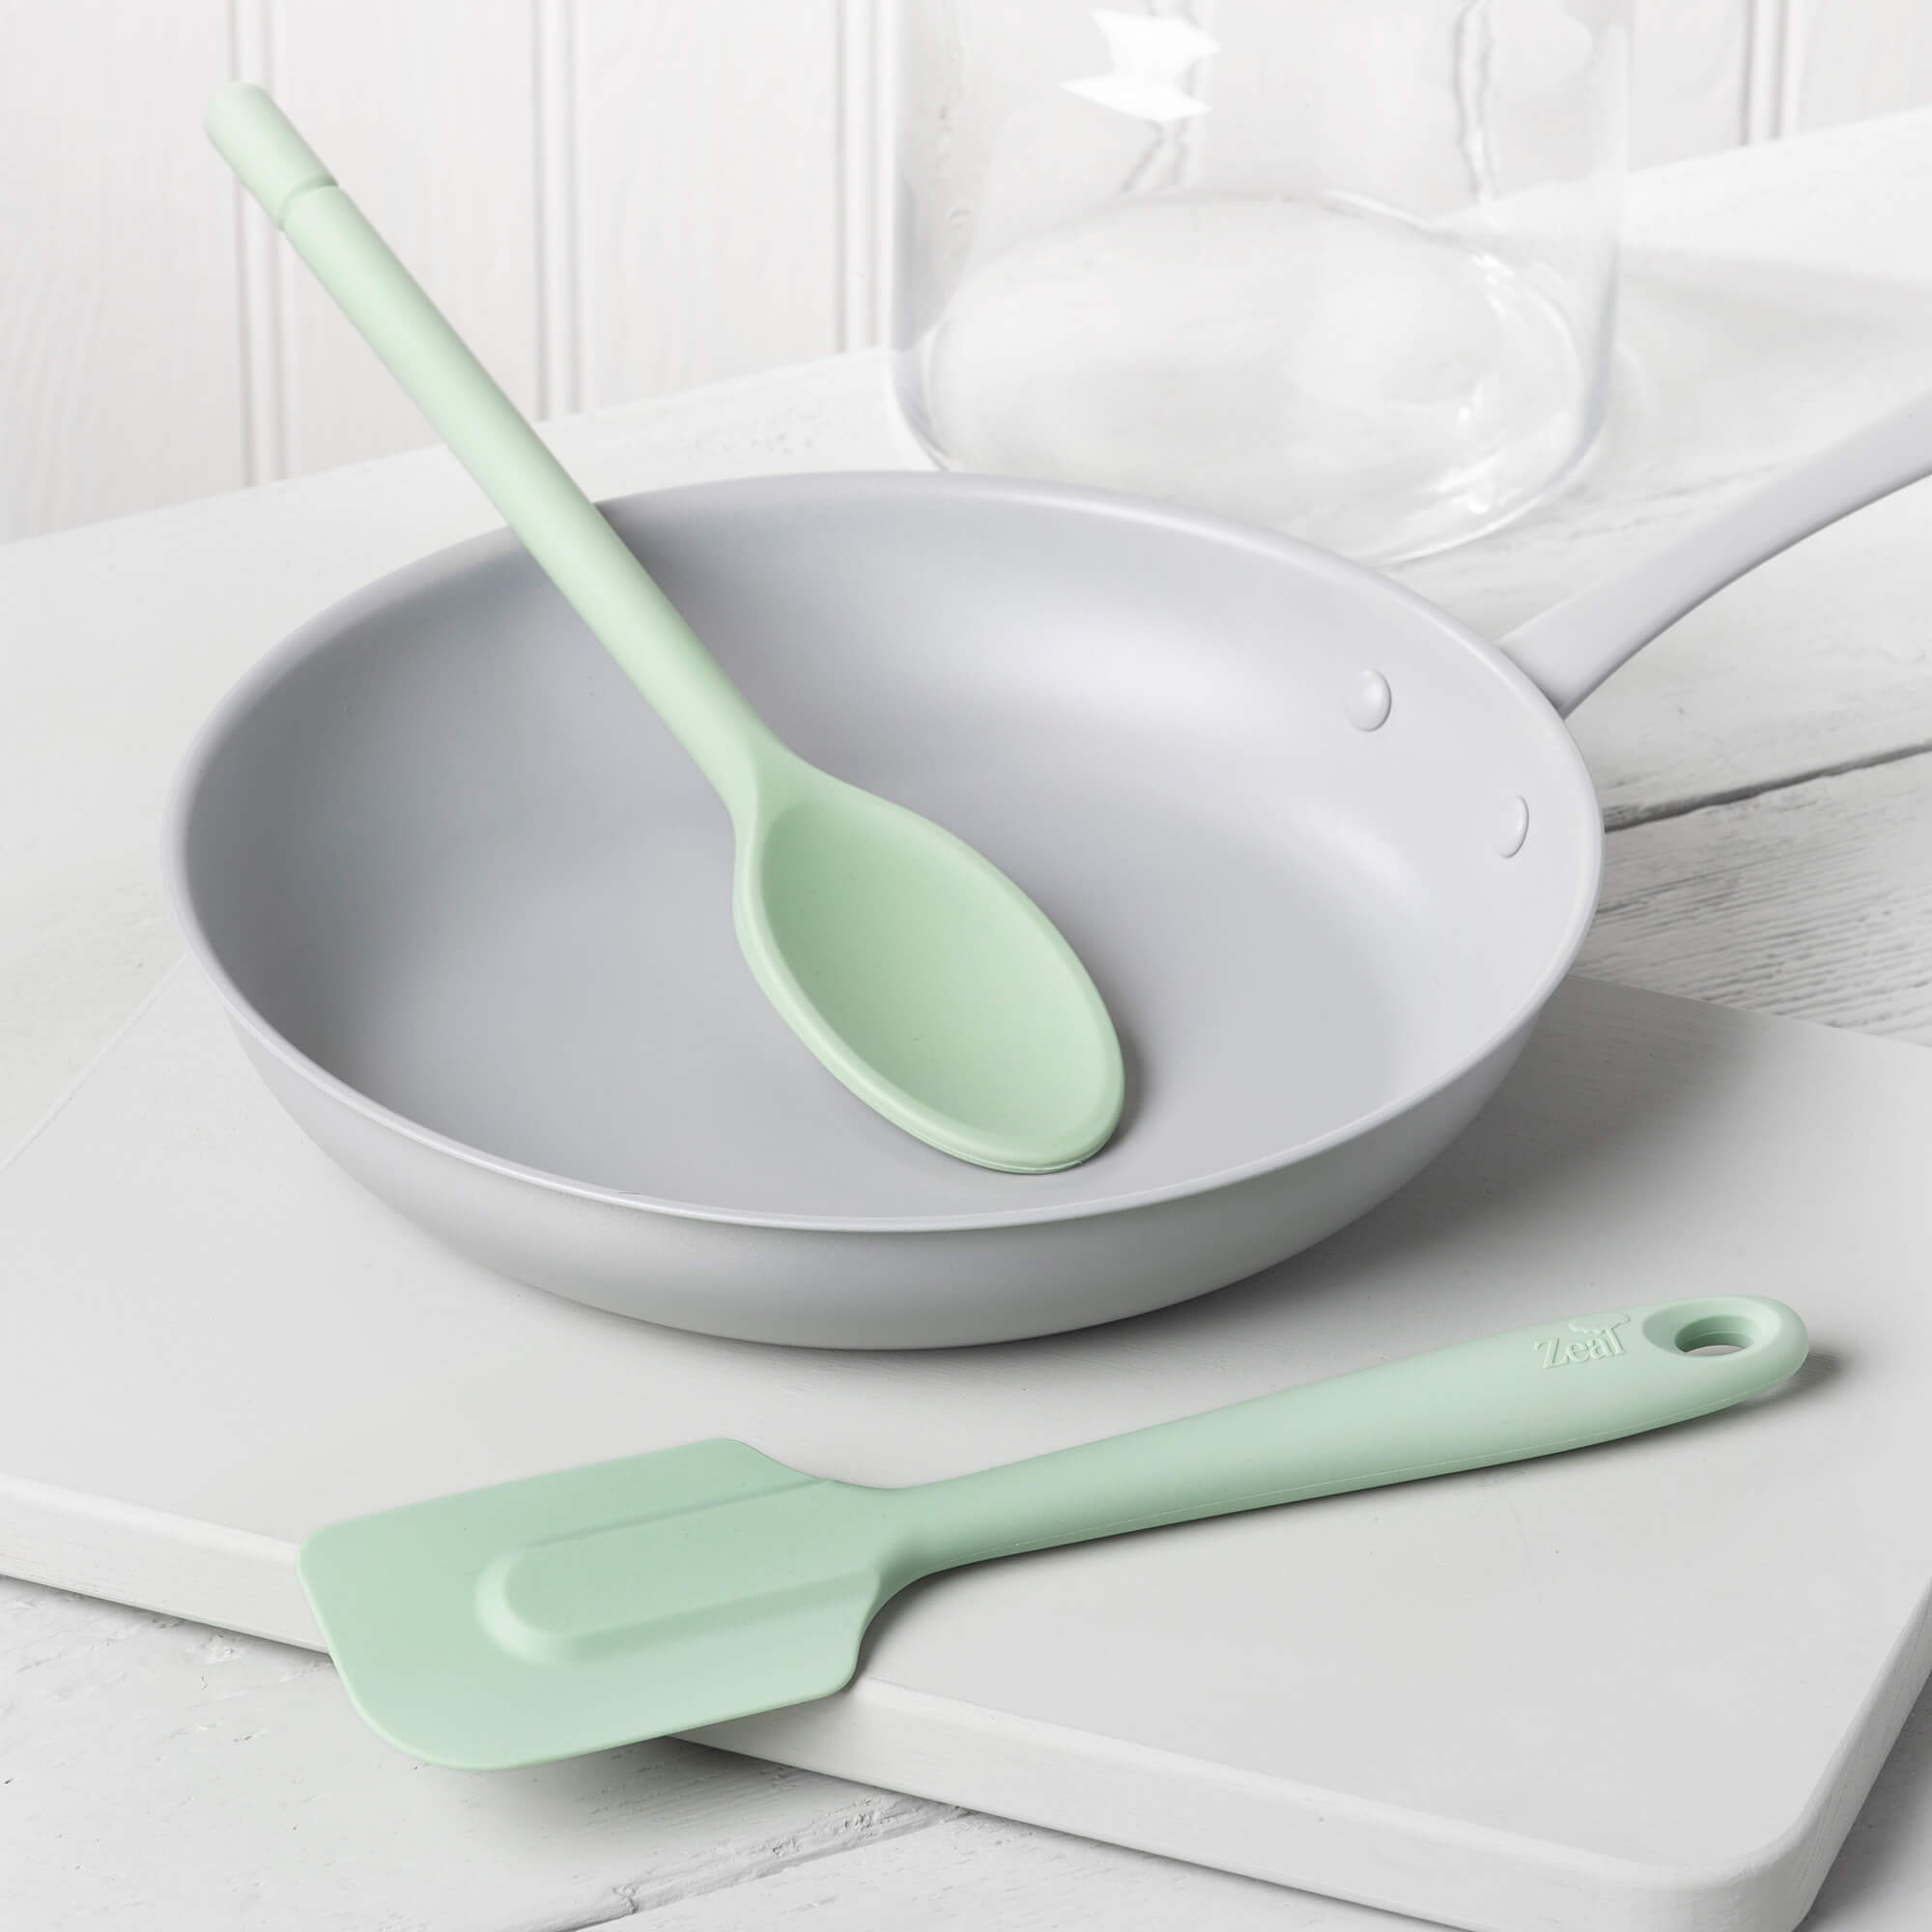 Zeal Silicone Spatula & Traditional Spoon Set in Sage Green